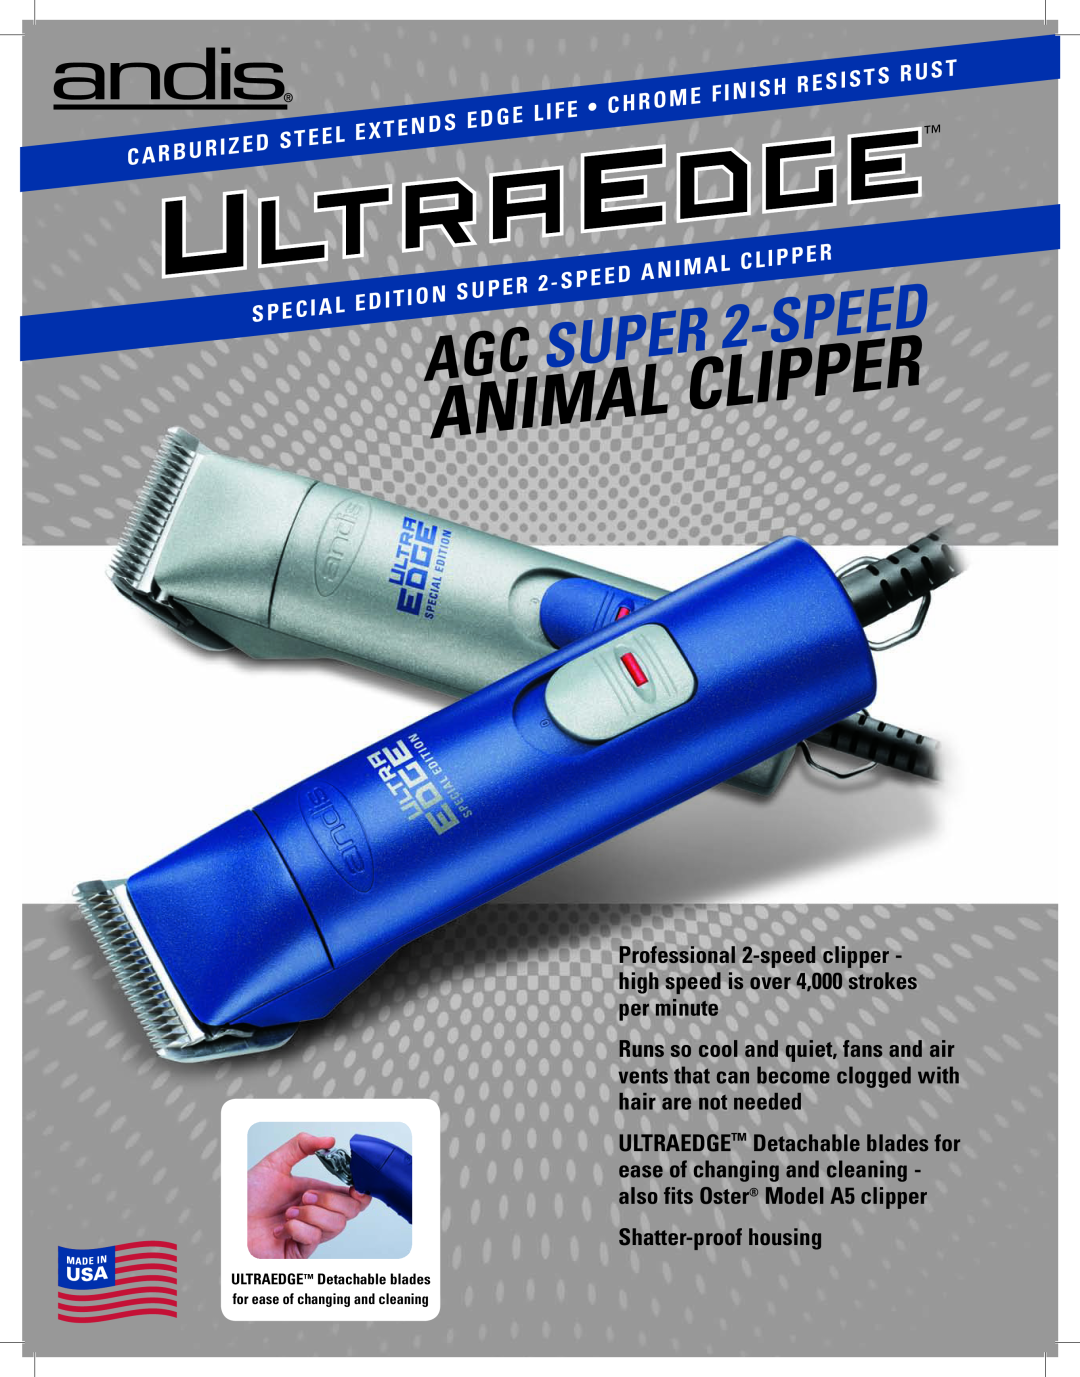 Andis Company AGCL manual Animal, Clipper, Agc Super, Speed, Shatter-proofhousing, Finish, Resists, Chrome, Edge, Life 